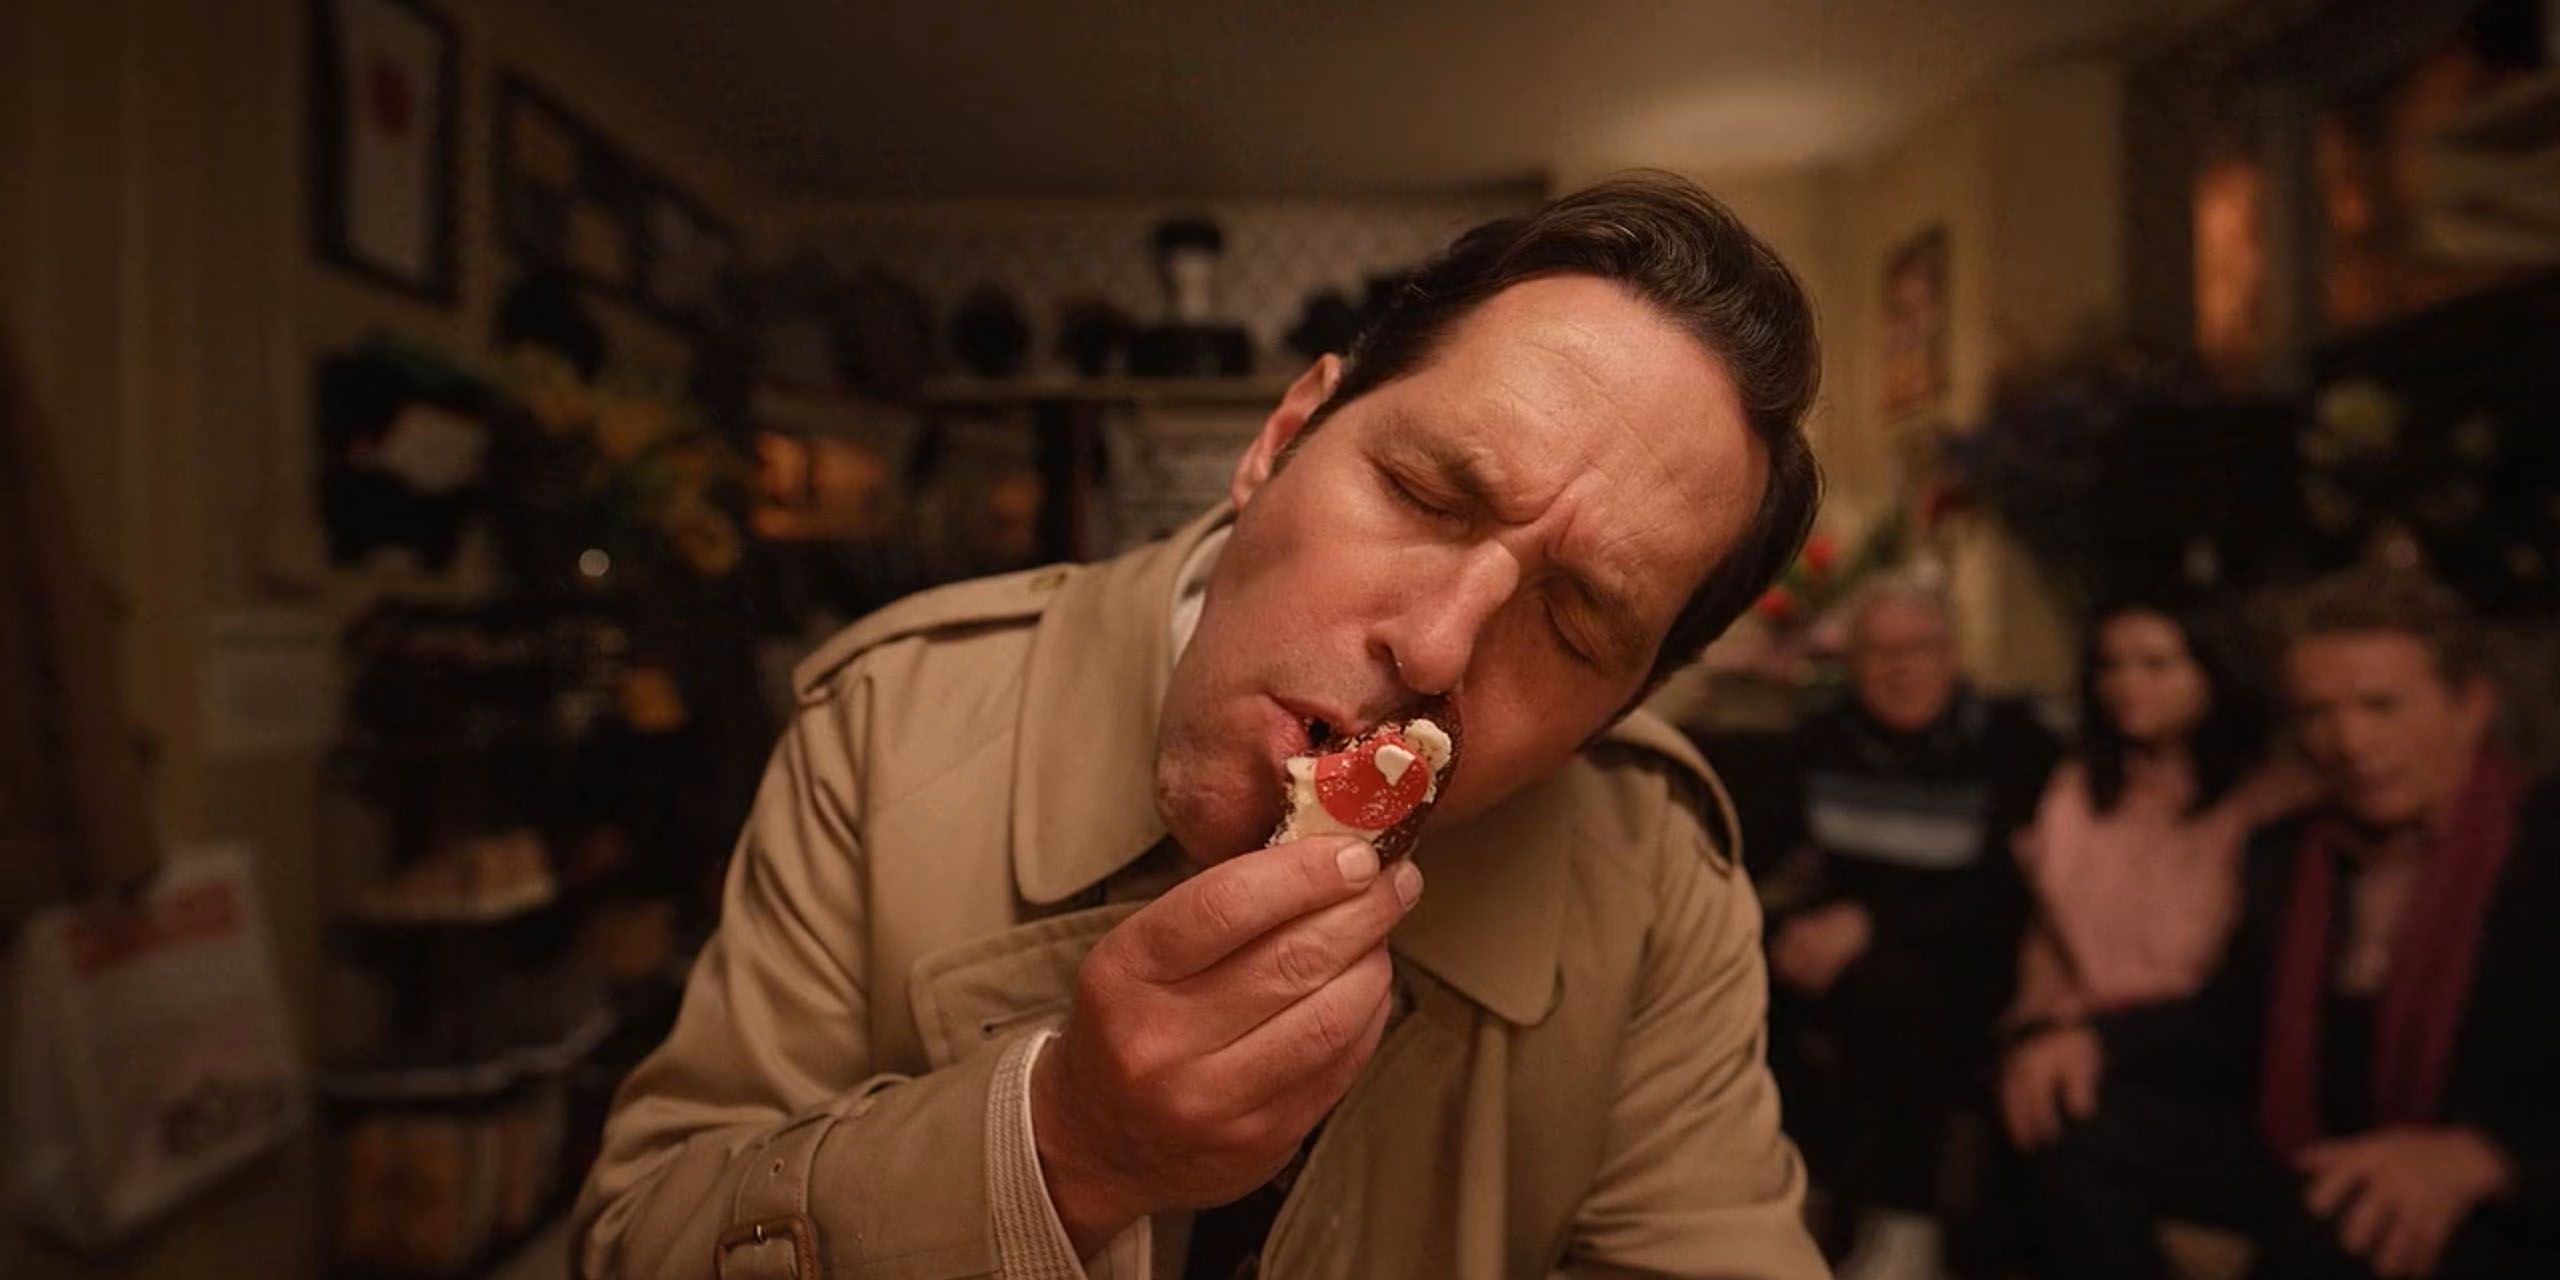 Paul Rudd as Ben Glenroy eating a cookie in front of his dressing room mirror in Hulu's Only Murders In The Building